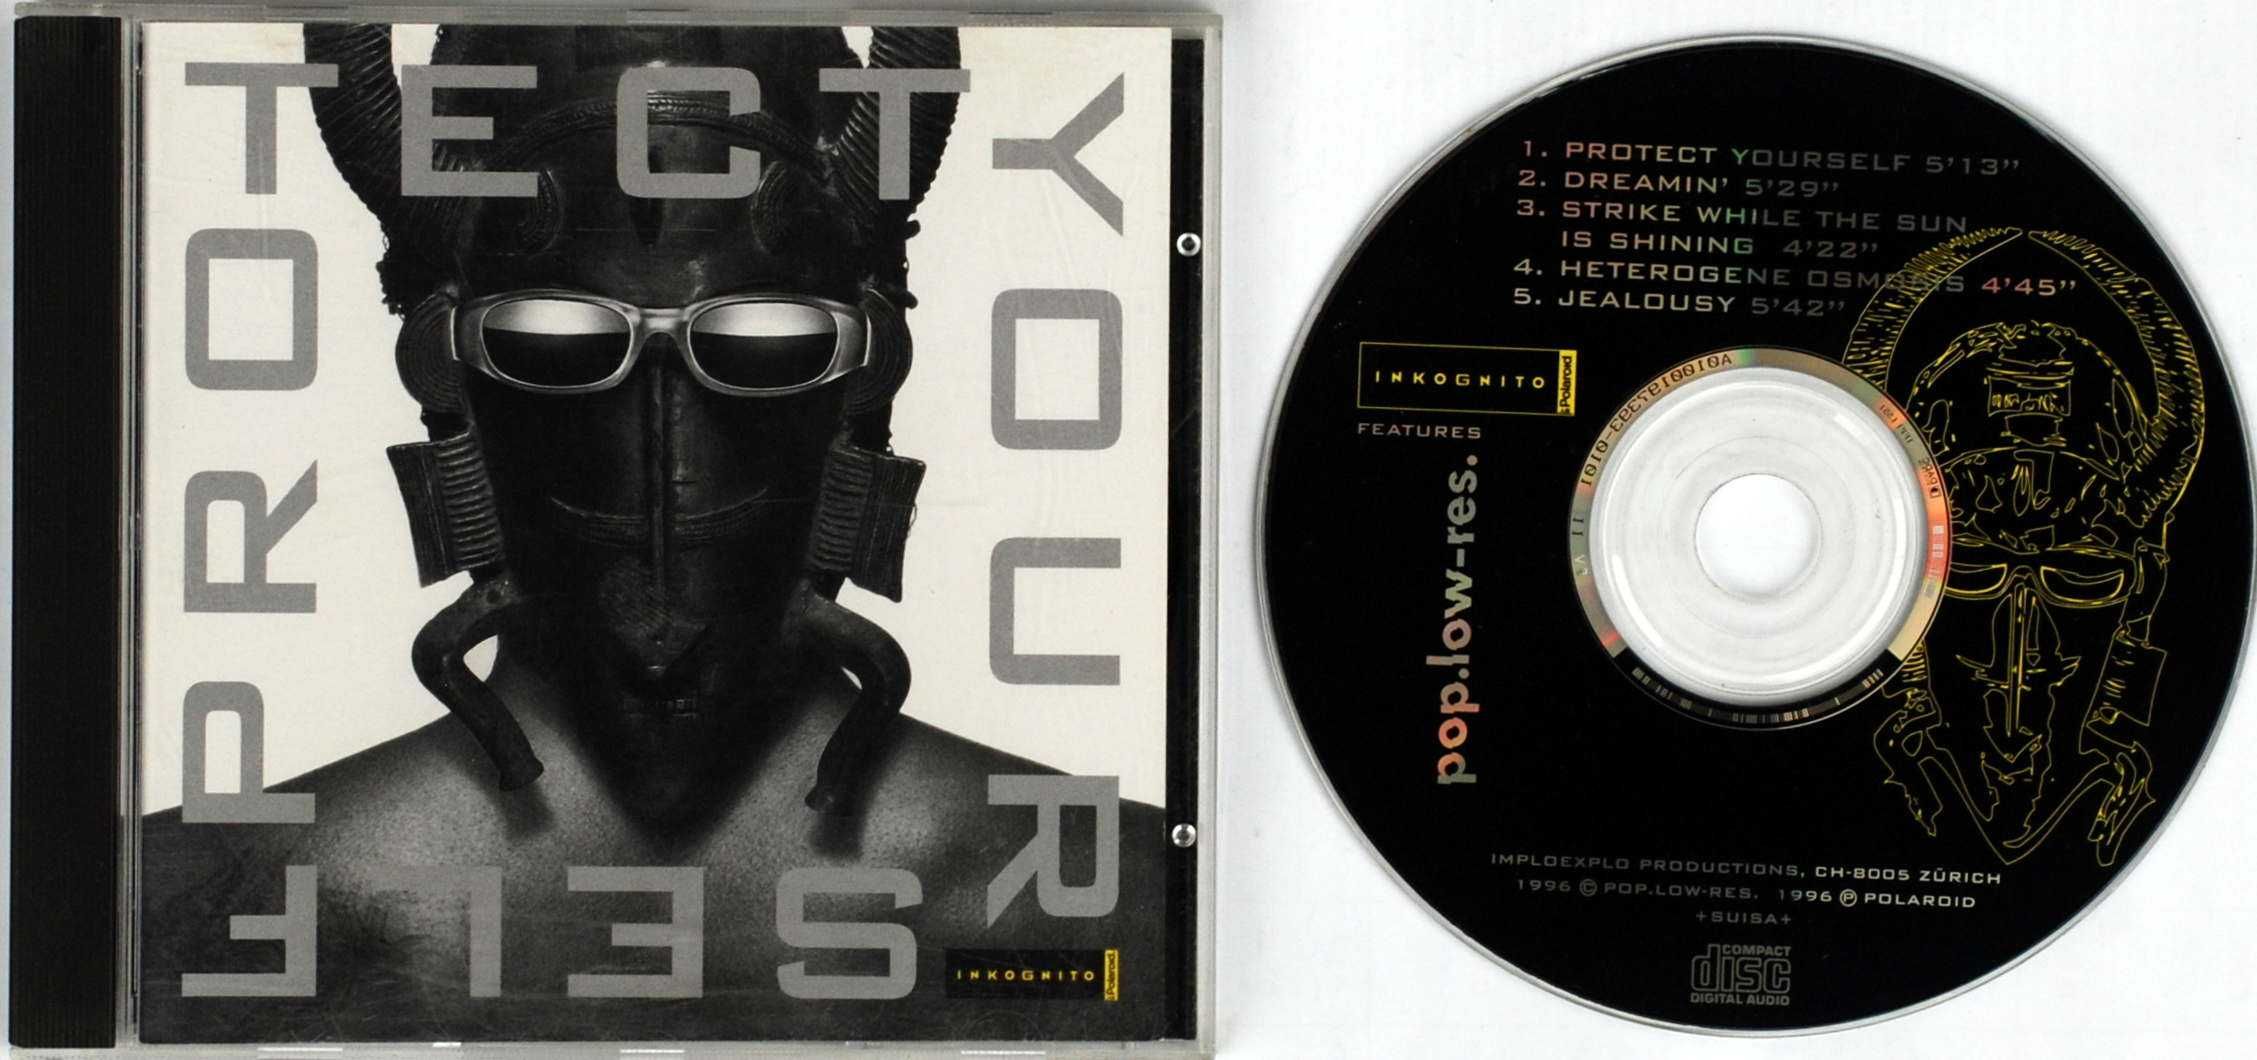 (CD) Inkognito Features: Pop.low-res. - Protect Yoursel